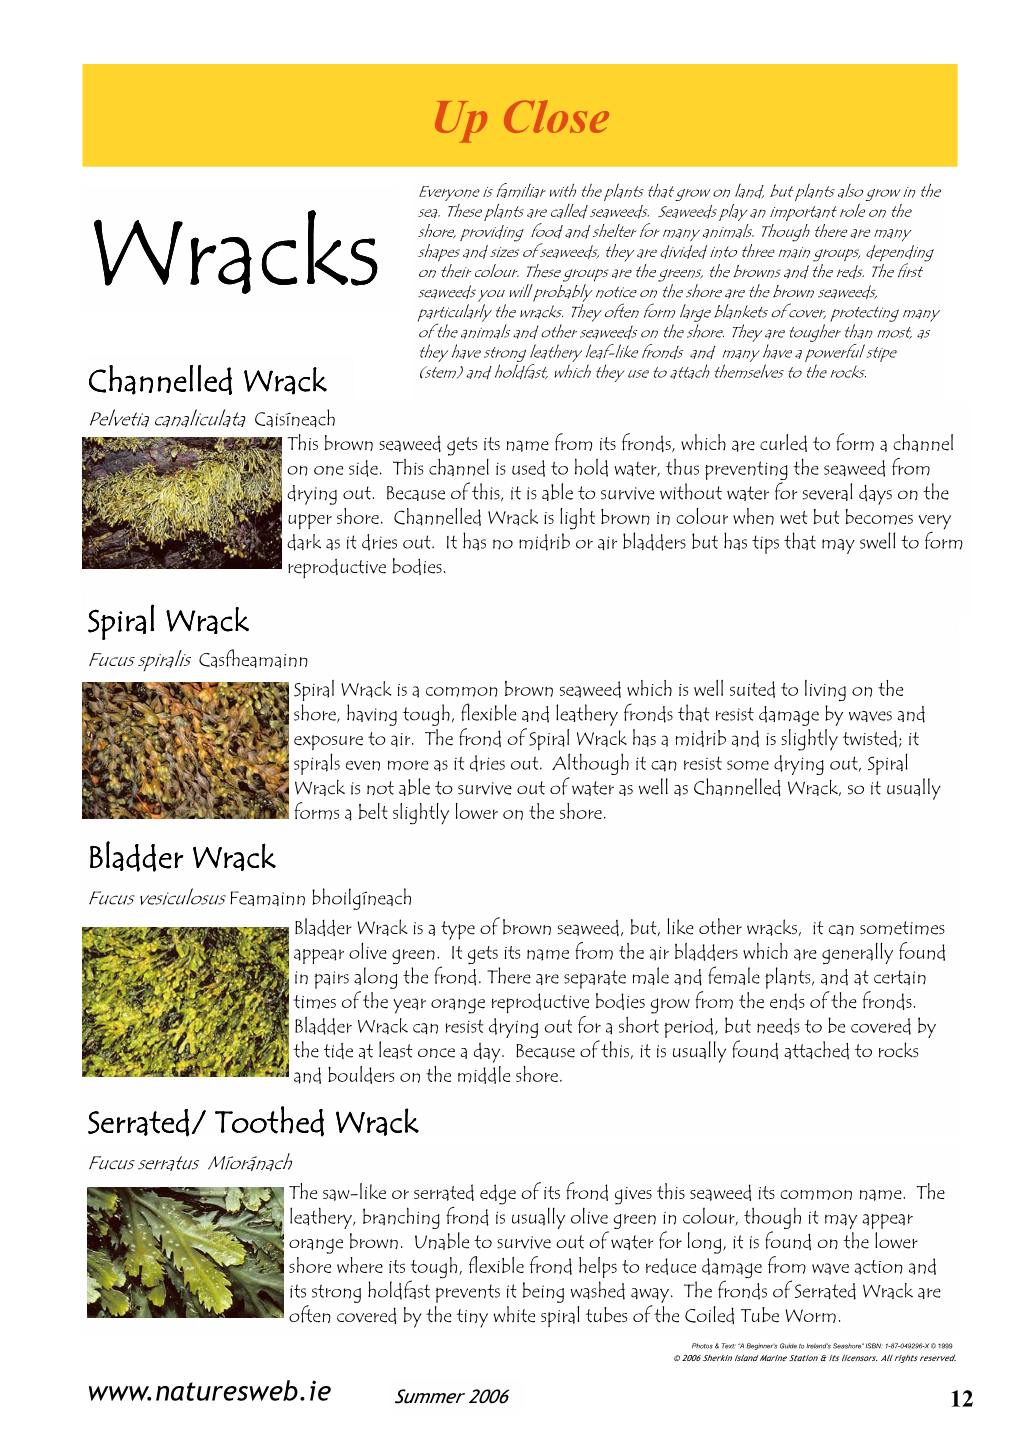 Wracks Seaweeds You Will Probably Notice on the Shore Are the Brown Seaweeds, Particularly the Wracks